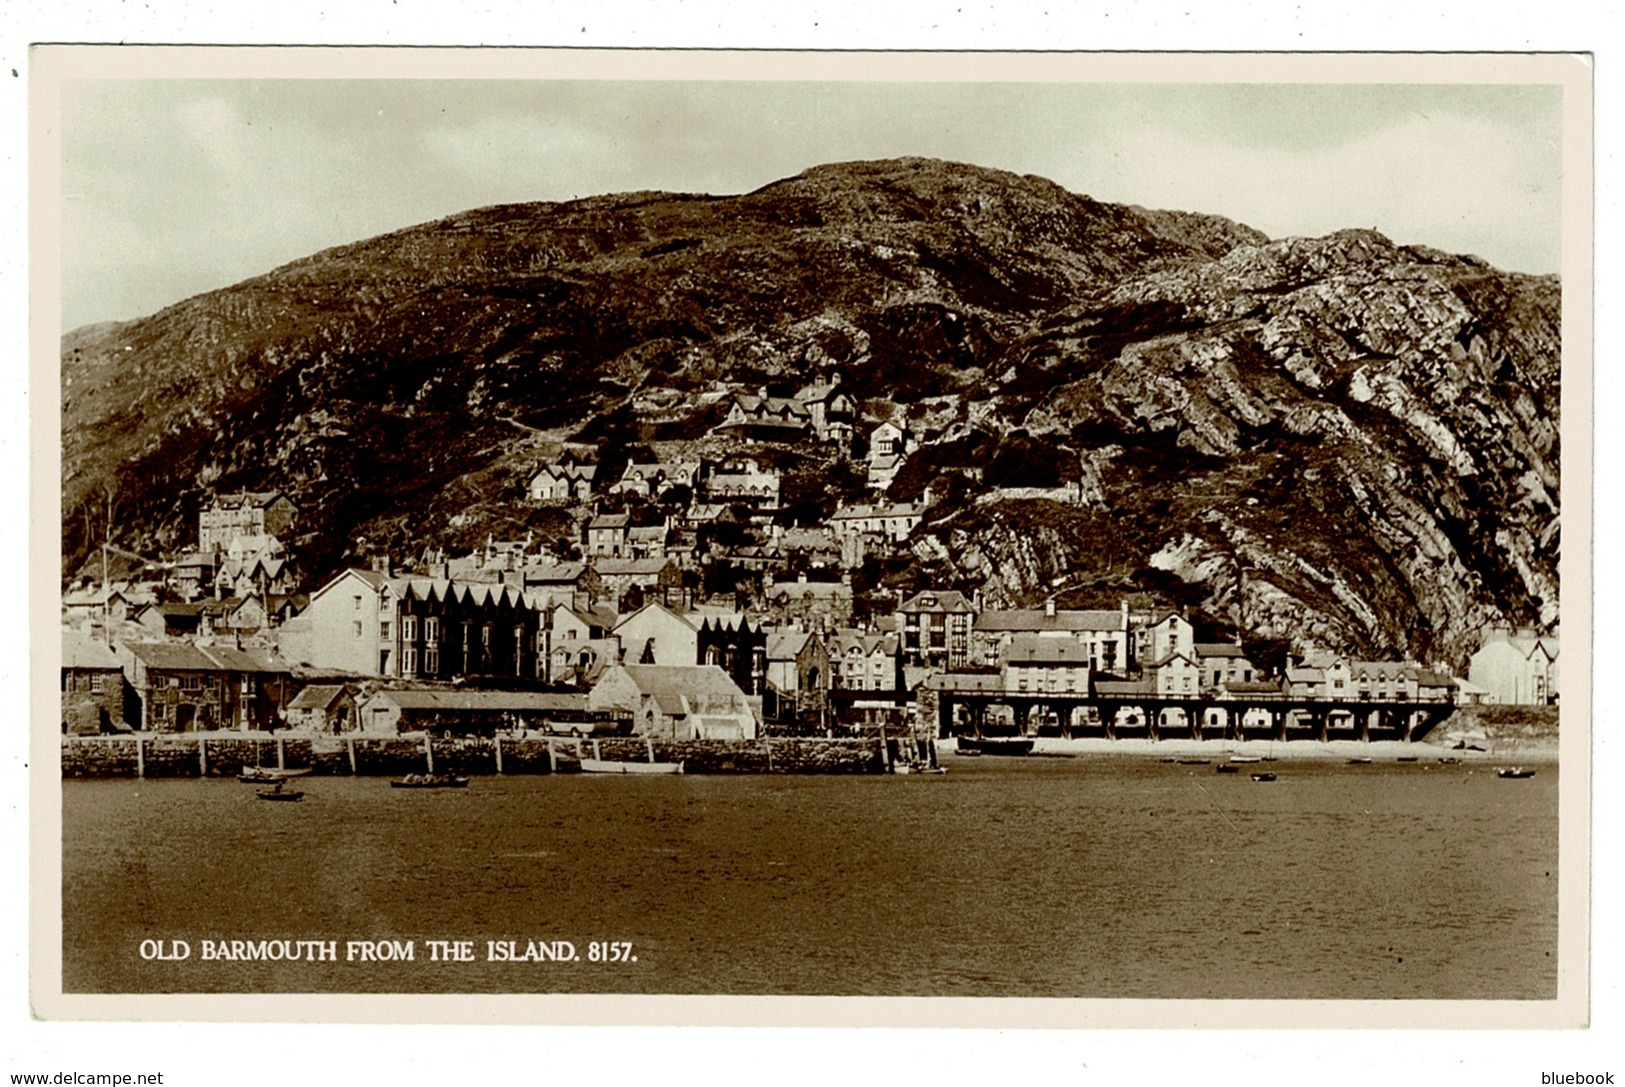 Ref 1344 - J. Salmon Real Photo Postcard Old Barmouth From The Island Merionethshire Wales - Merionethshire